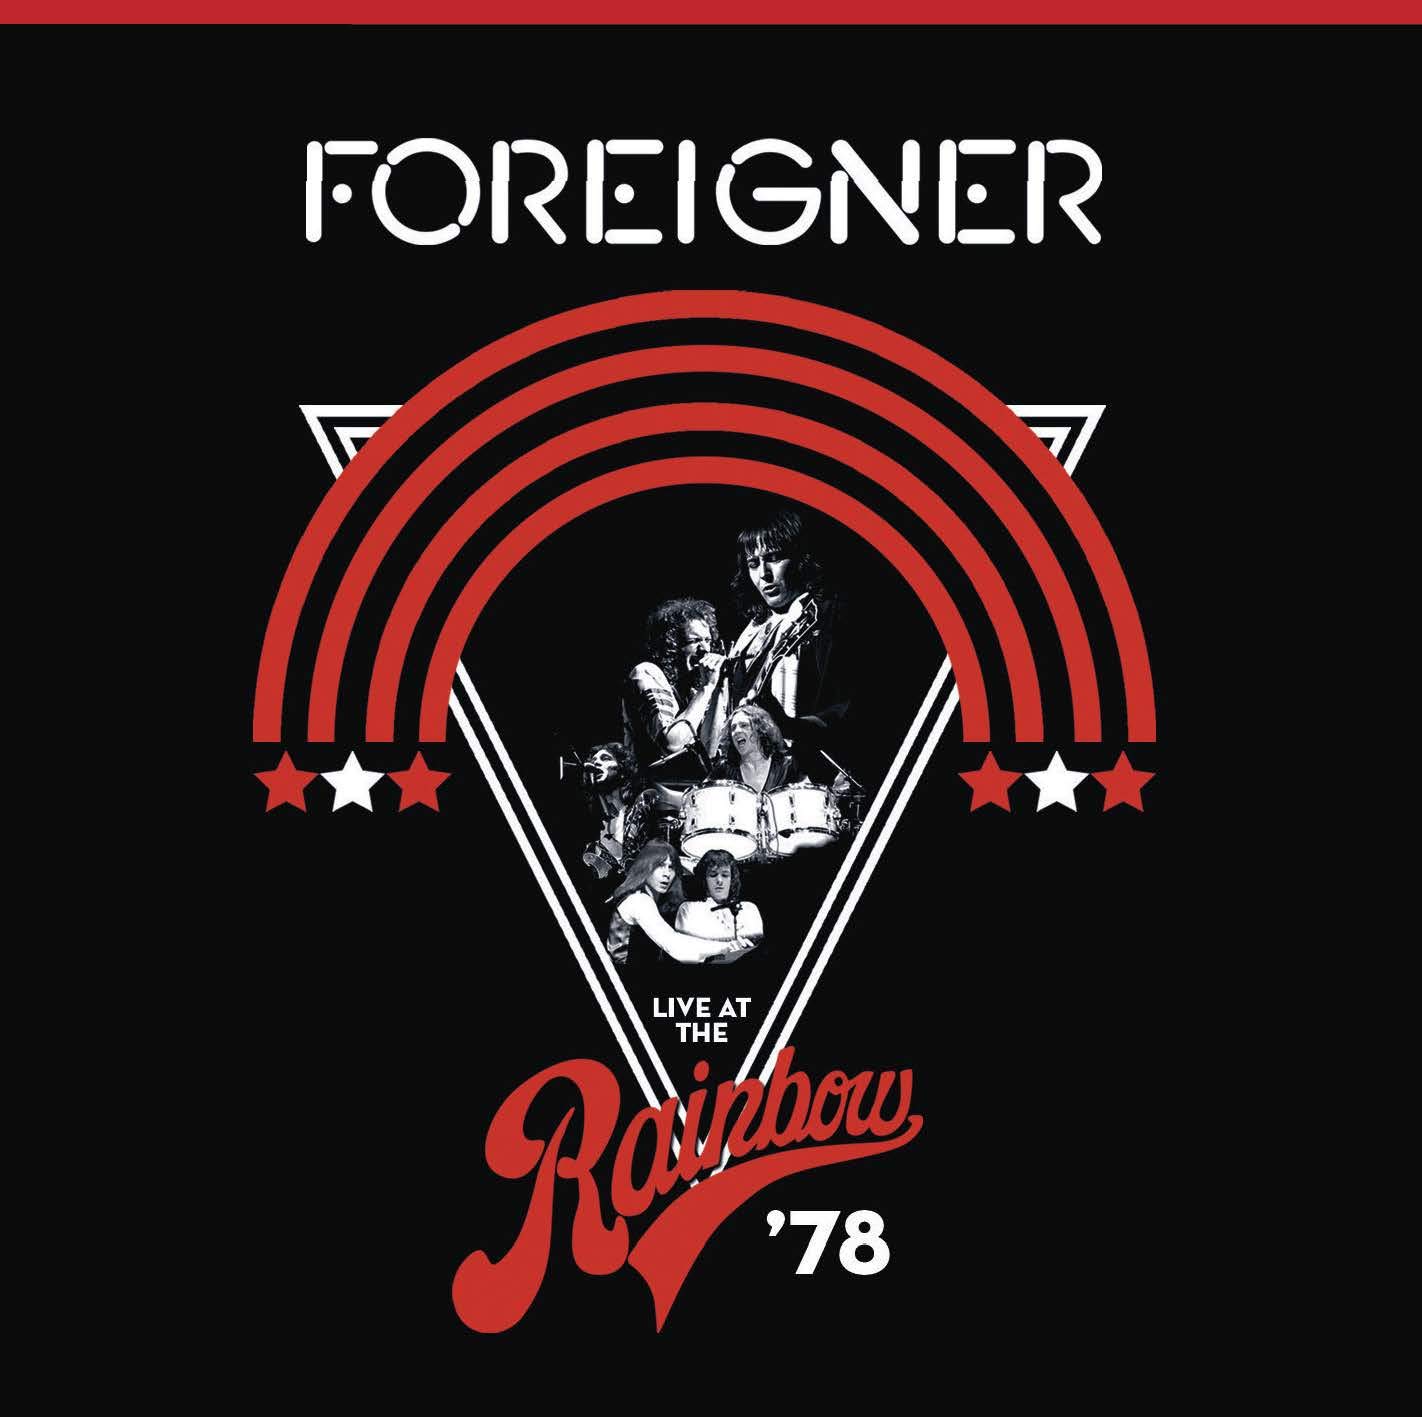 Cd 78. Foreigner "Live in Chicago". Foreigner Live at the Rainbow '78 Blu-ray. Foreigner концерт Live 1978г. Live at the Rainbow ‘78.